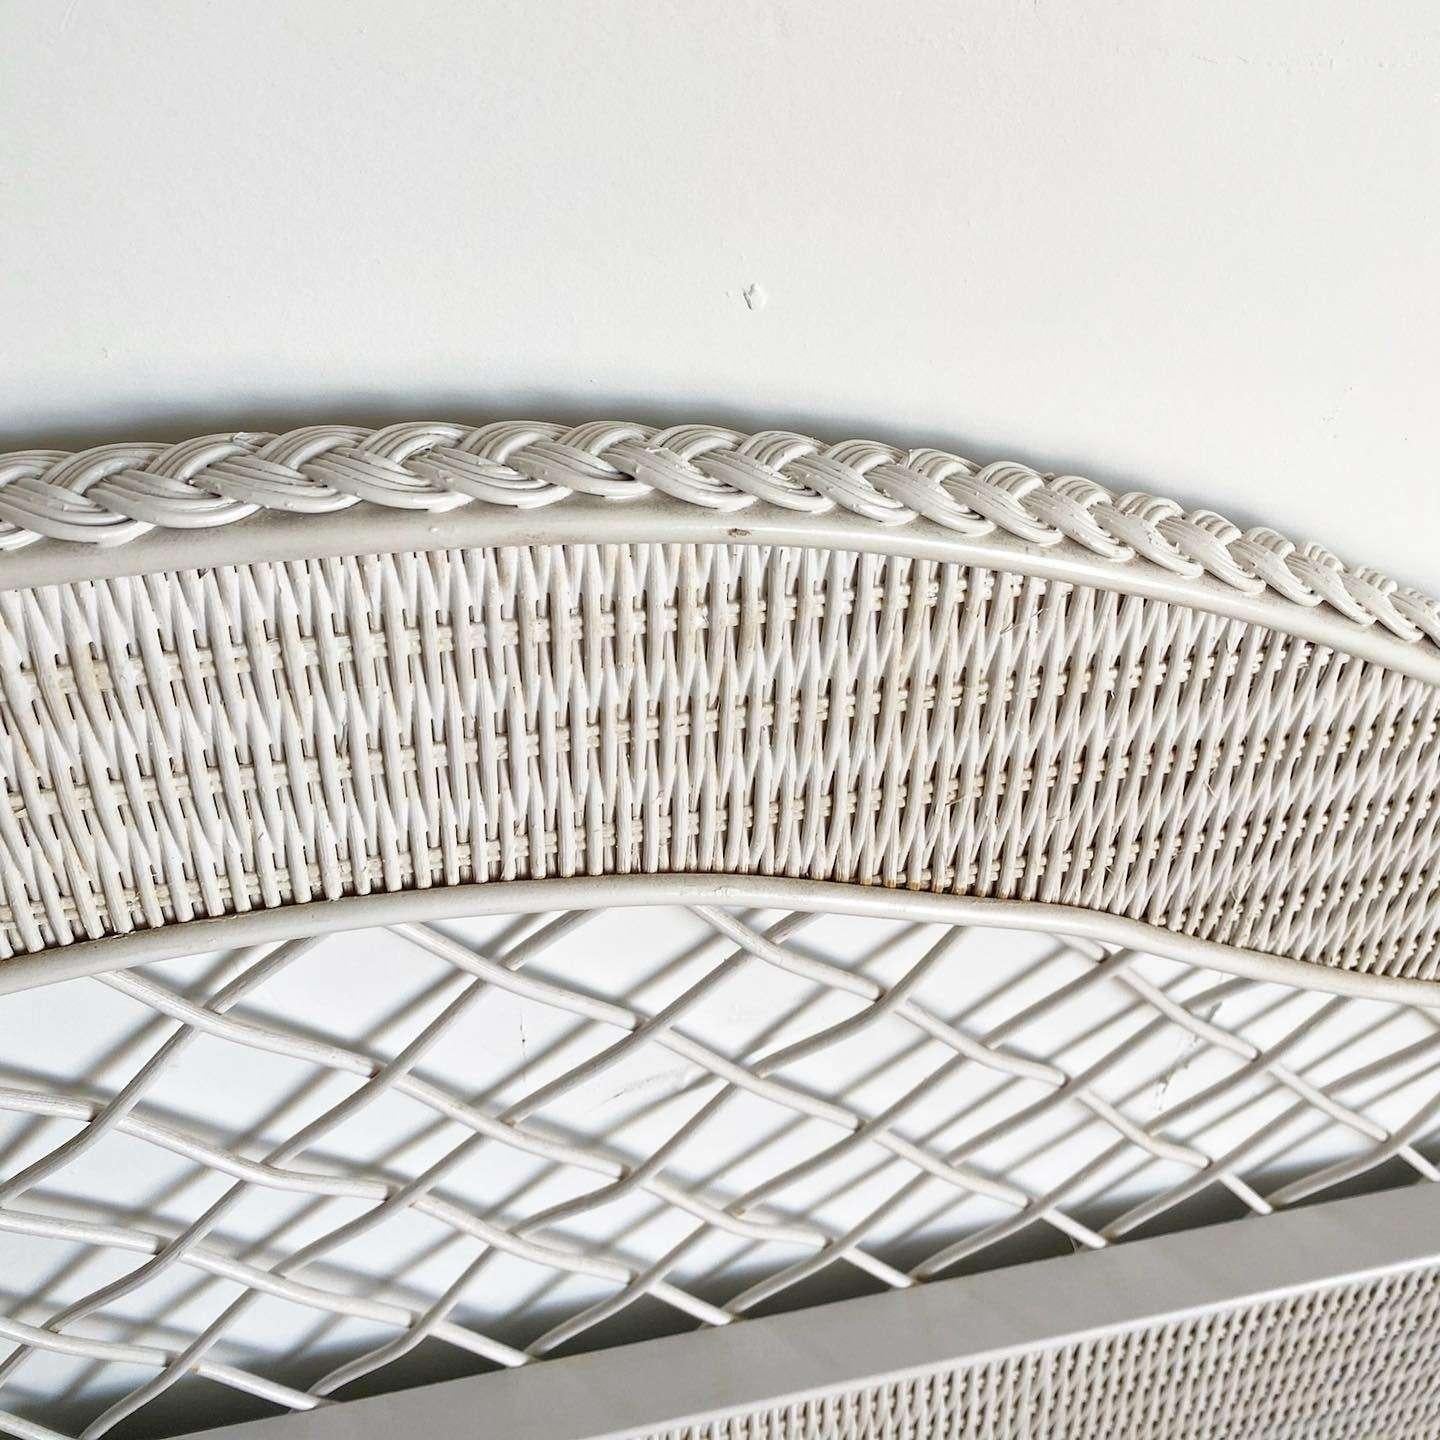 Late 20th Century Boho Chic White Wicker Headboard by Henry Link For Sale